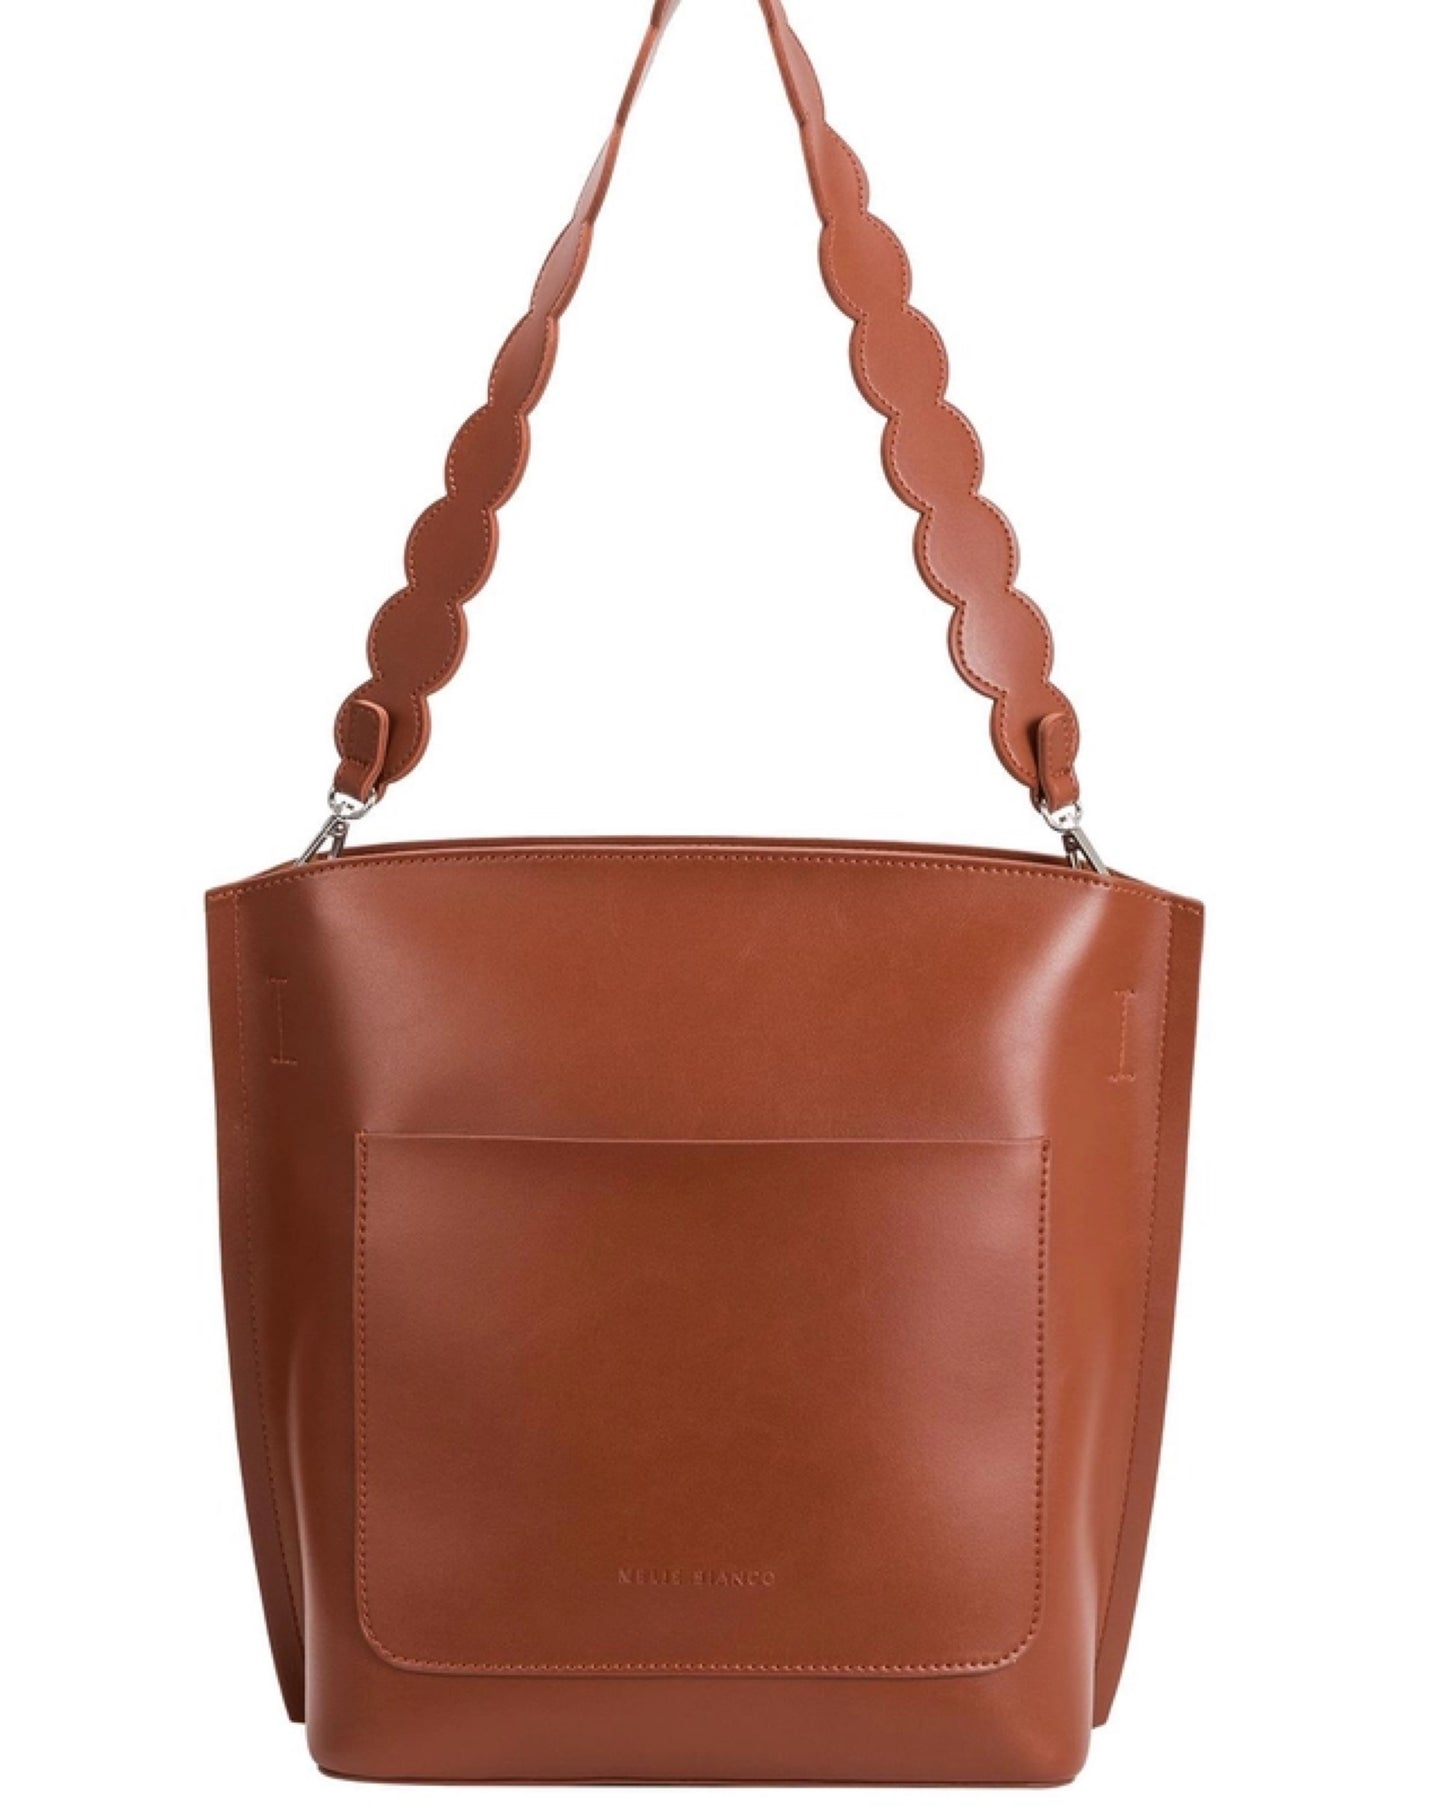 Madison Bucket Tote in Brown with Lettuce Cut Strap